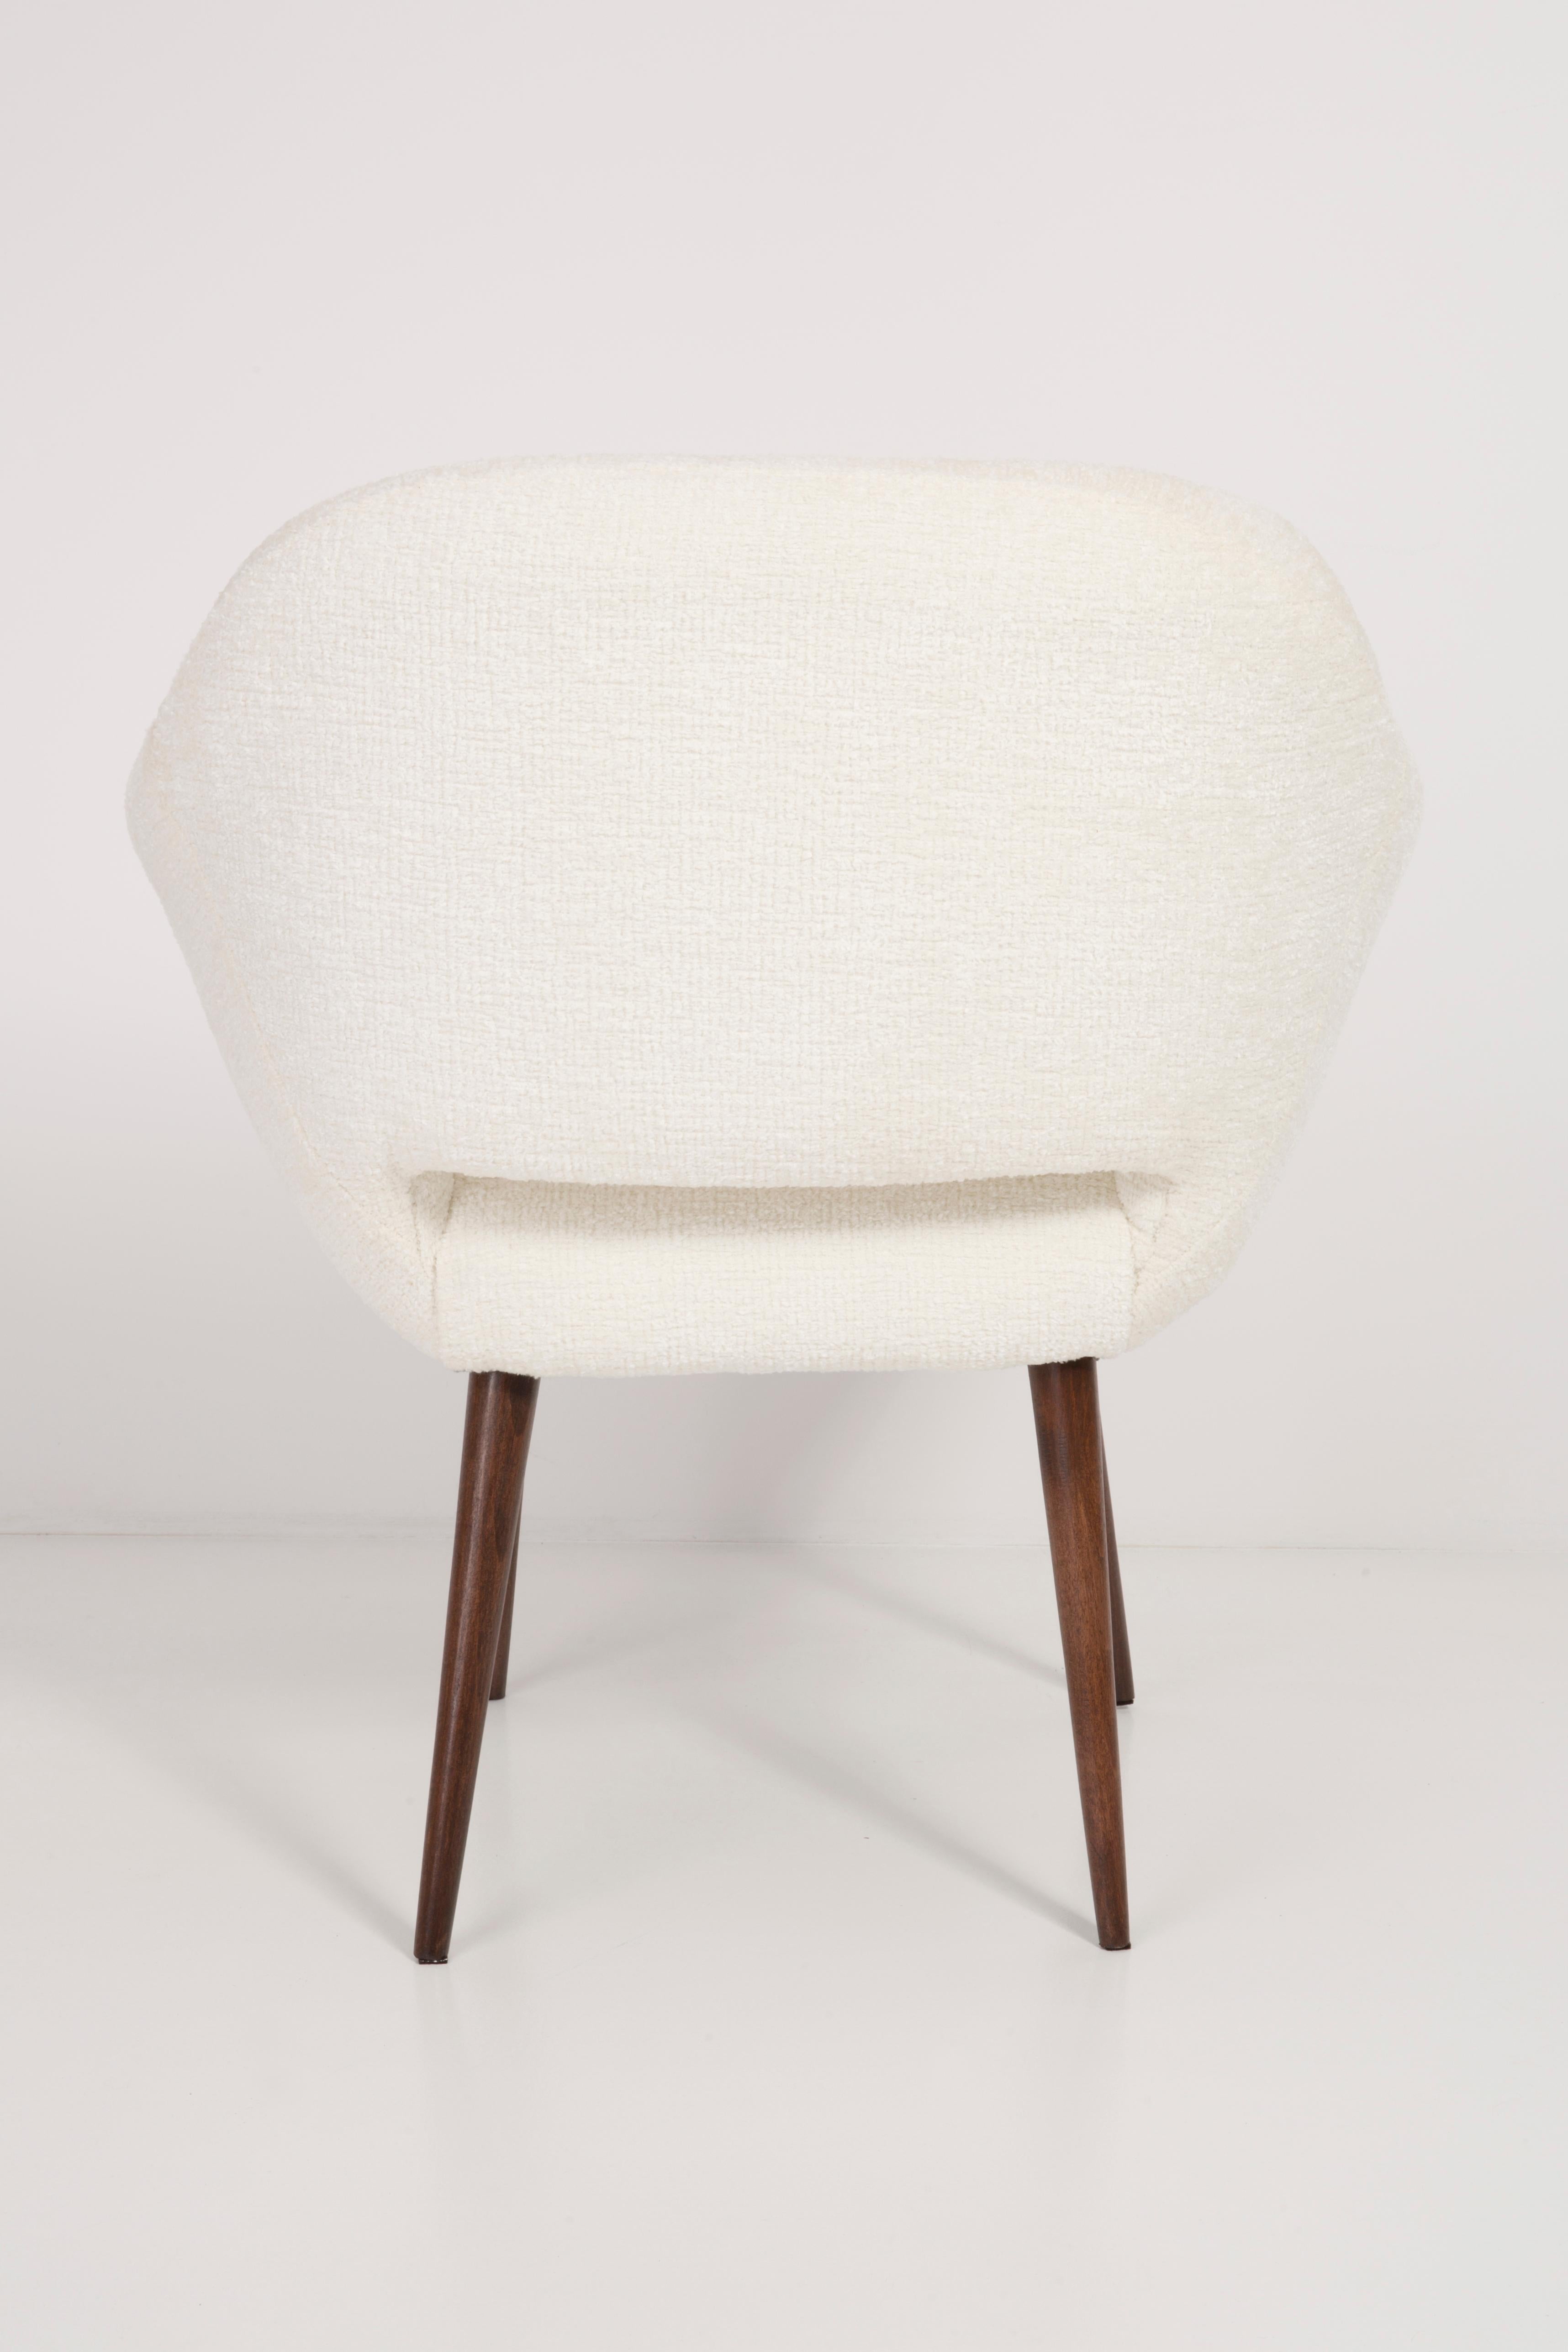 Midcentury White Boucle Club Armchair, 1960s For Sale 1